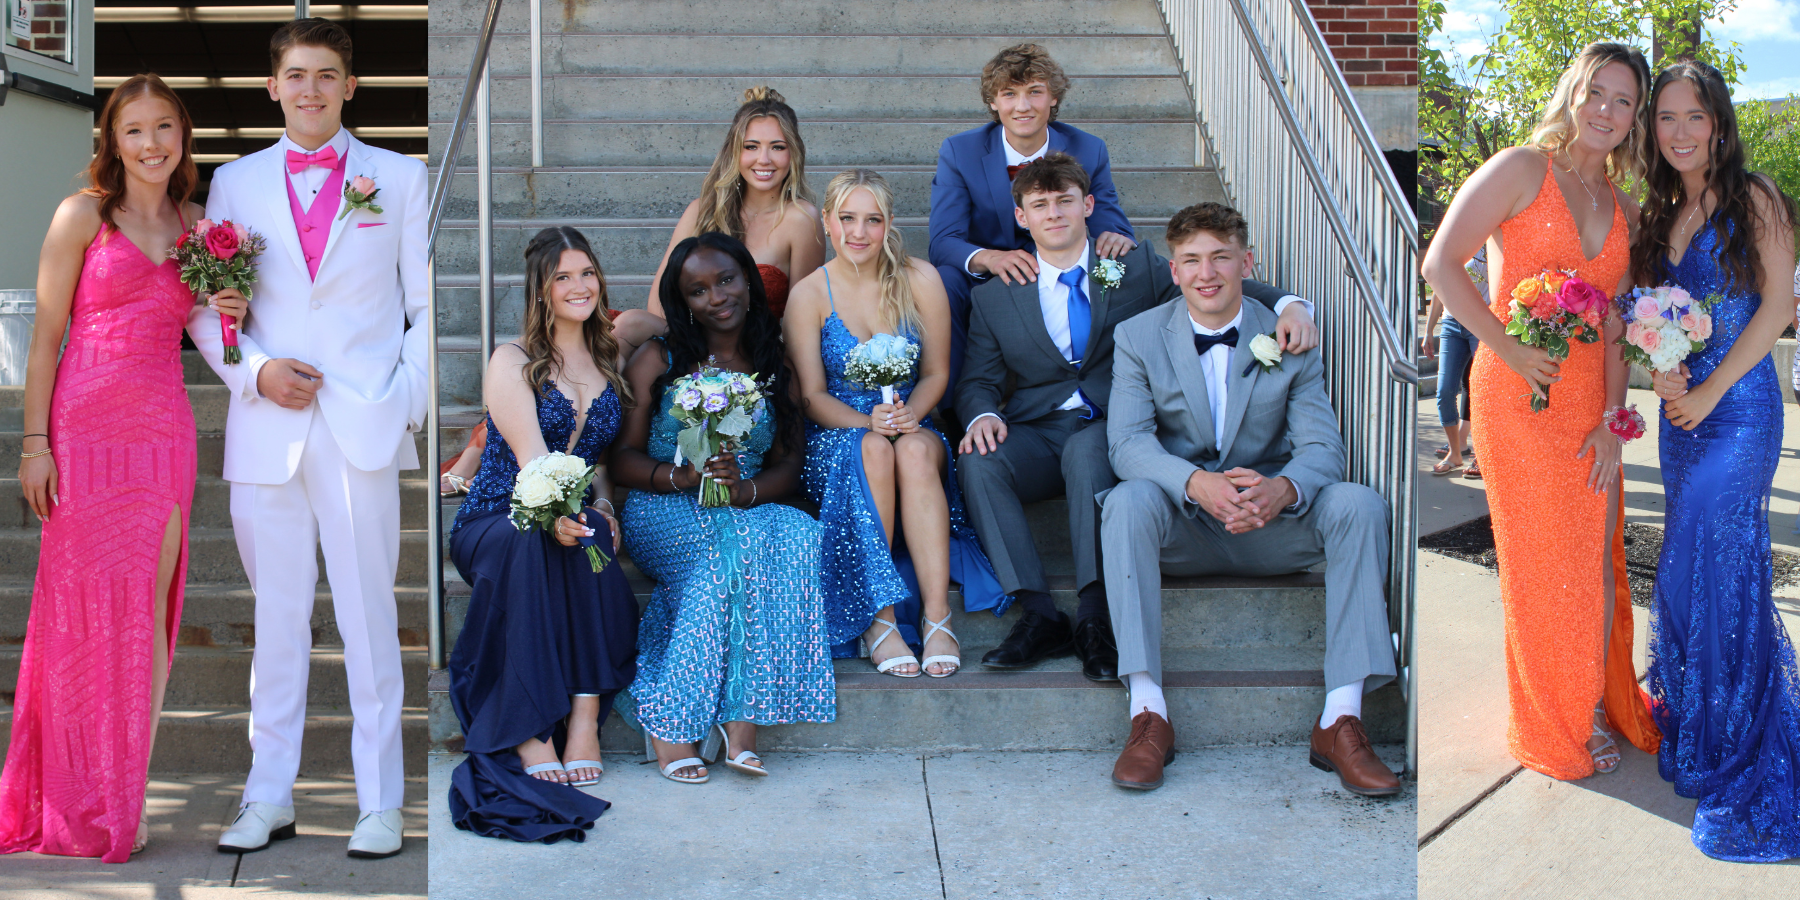 students dress up for the prom and pose outside the school